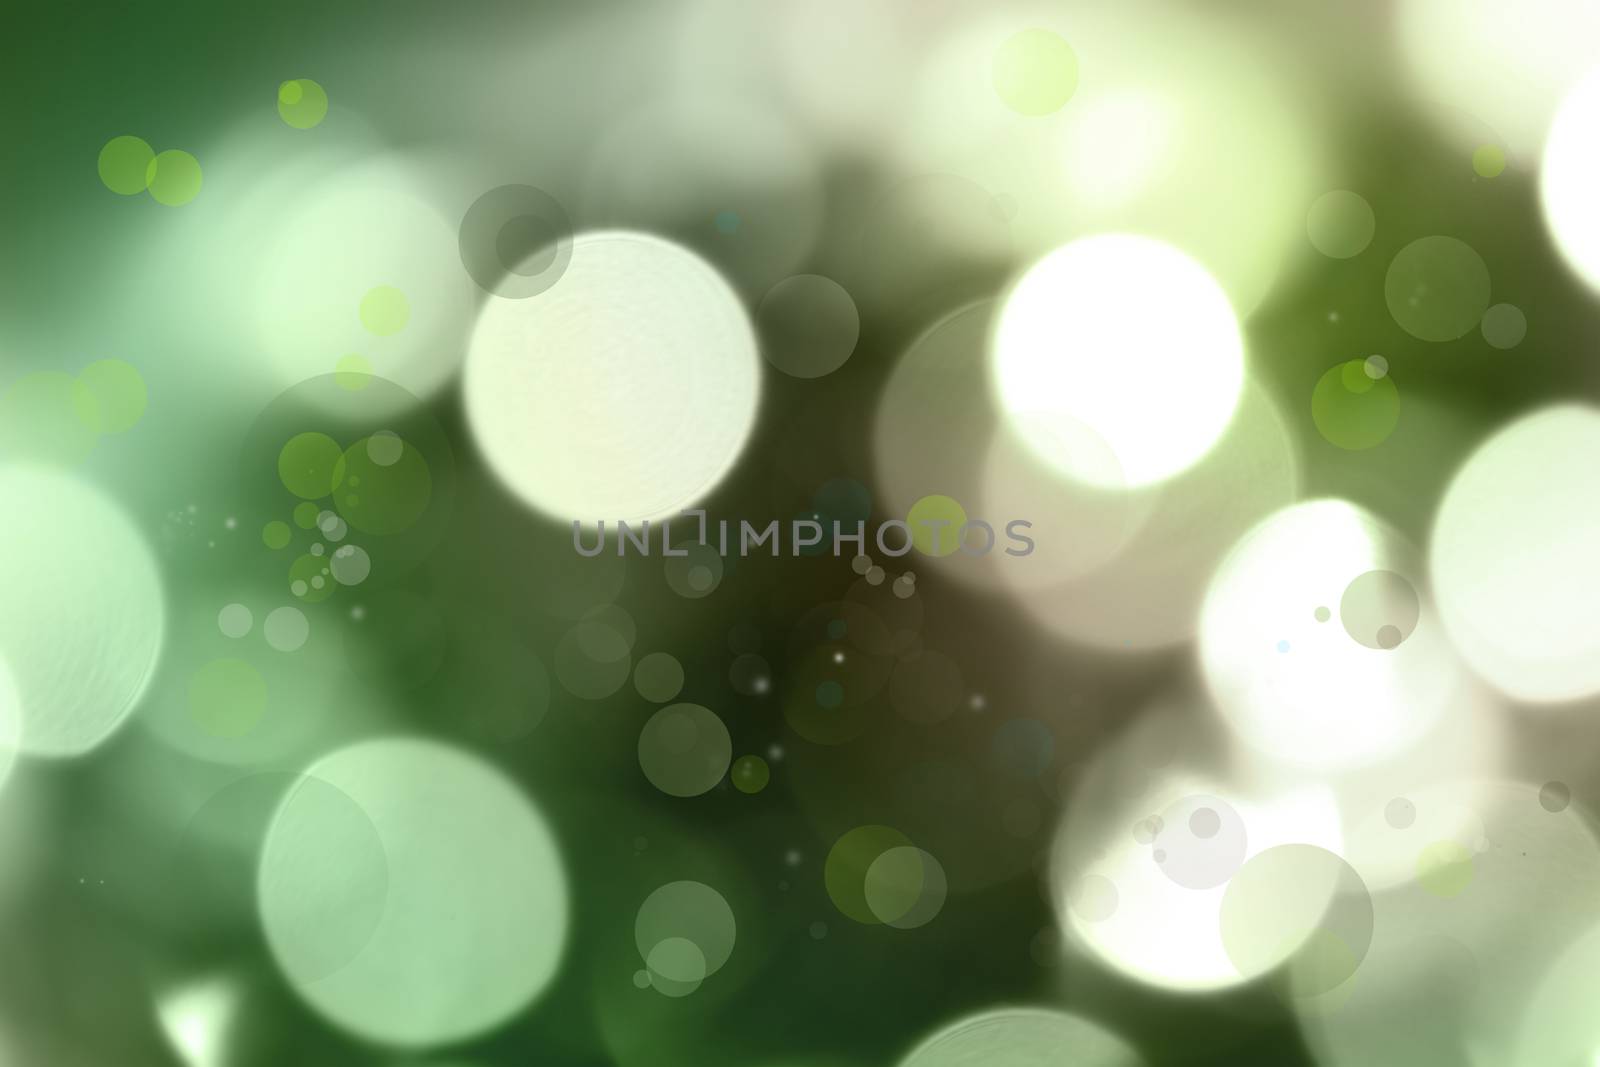 Bright circles of light abstract background 